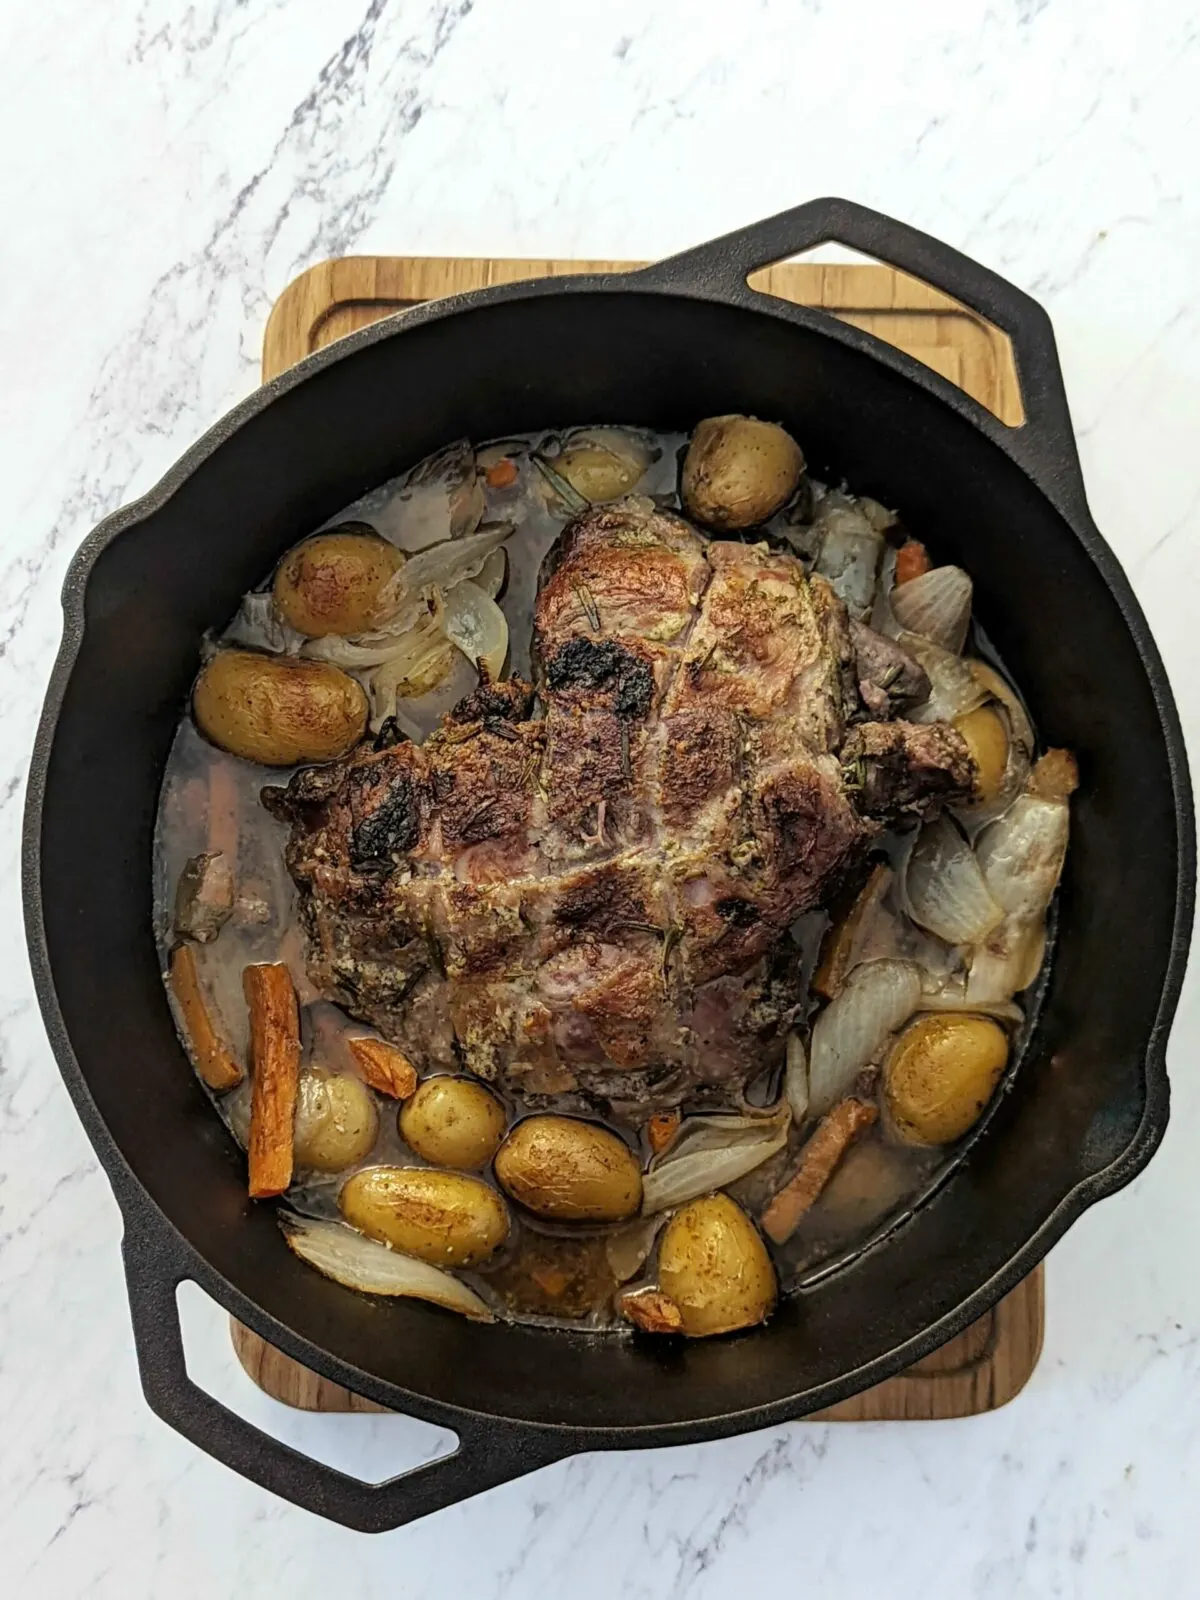 A full Dutch oven of roast with potatoes, carrots, and onion.